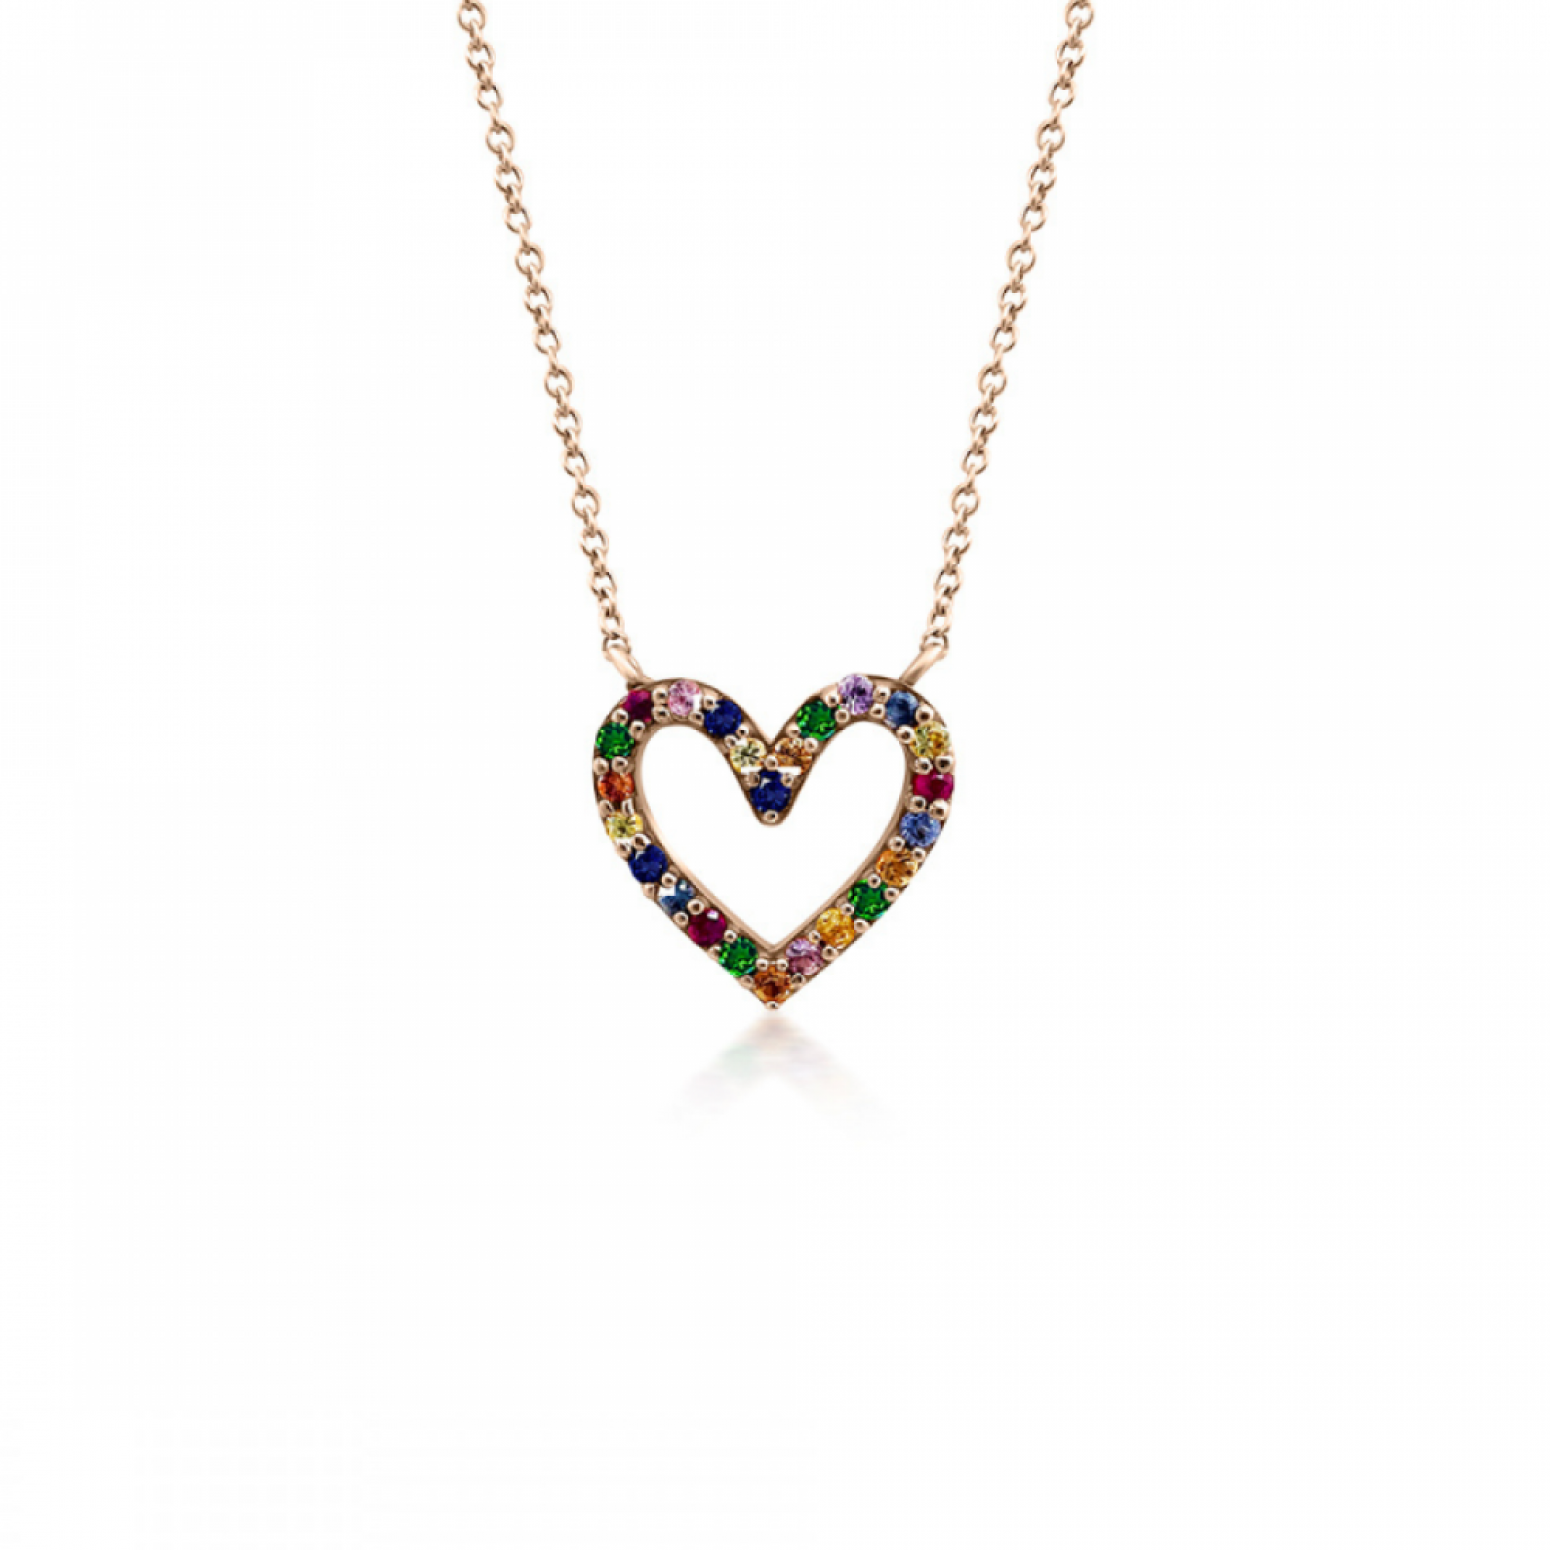 Heart necklace, Κ18 pink gold with sapphires, rubies and amethyst 0.22ct, ko5438 NECKLACES Κοσμηματα - chrilia.gr